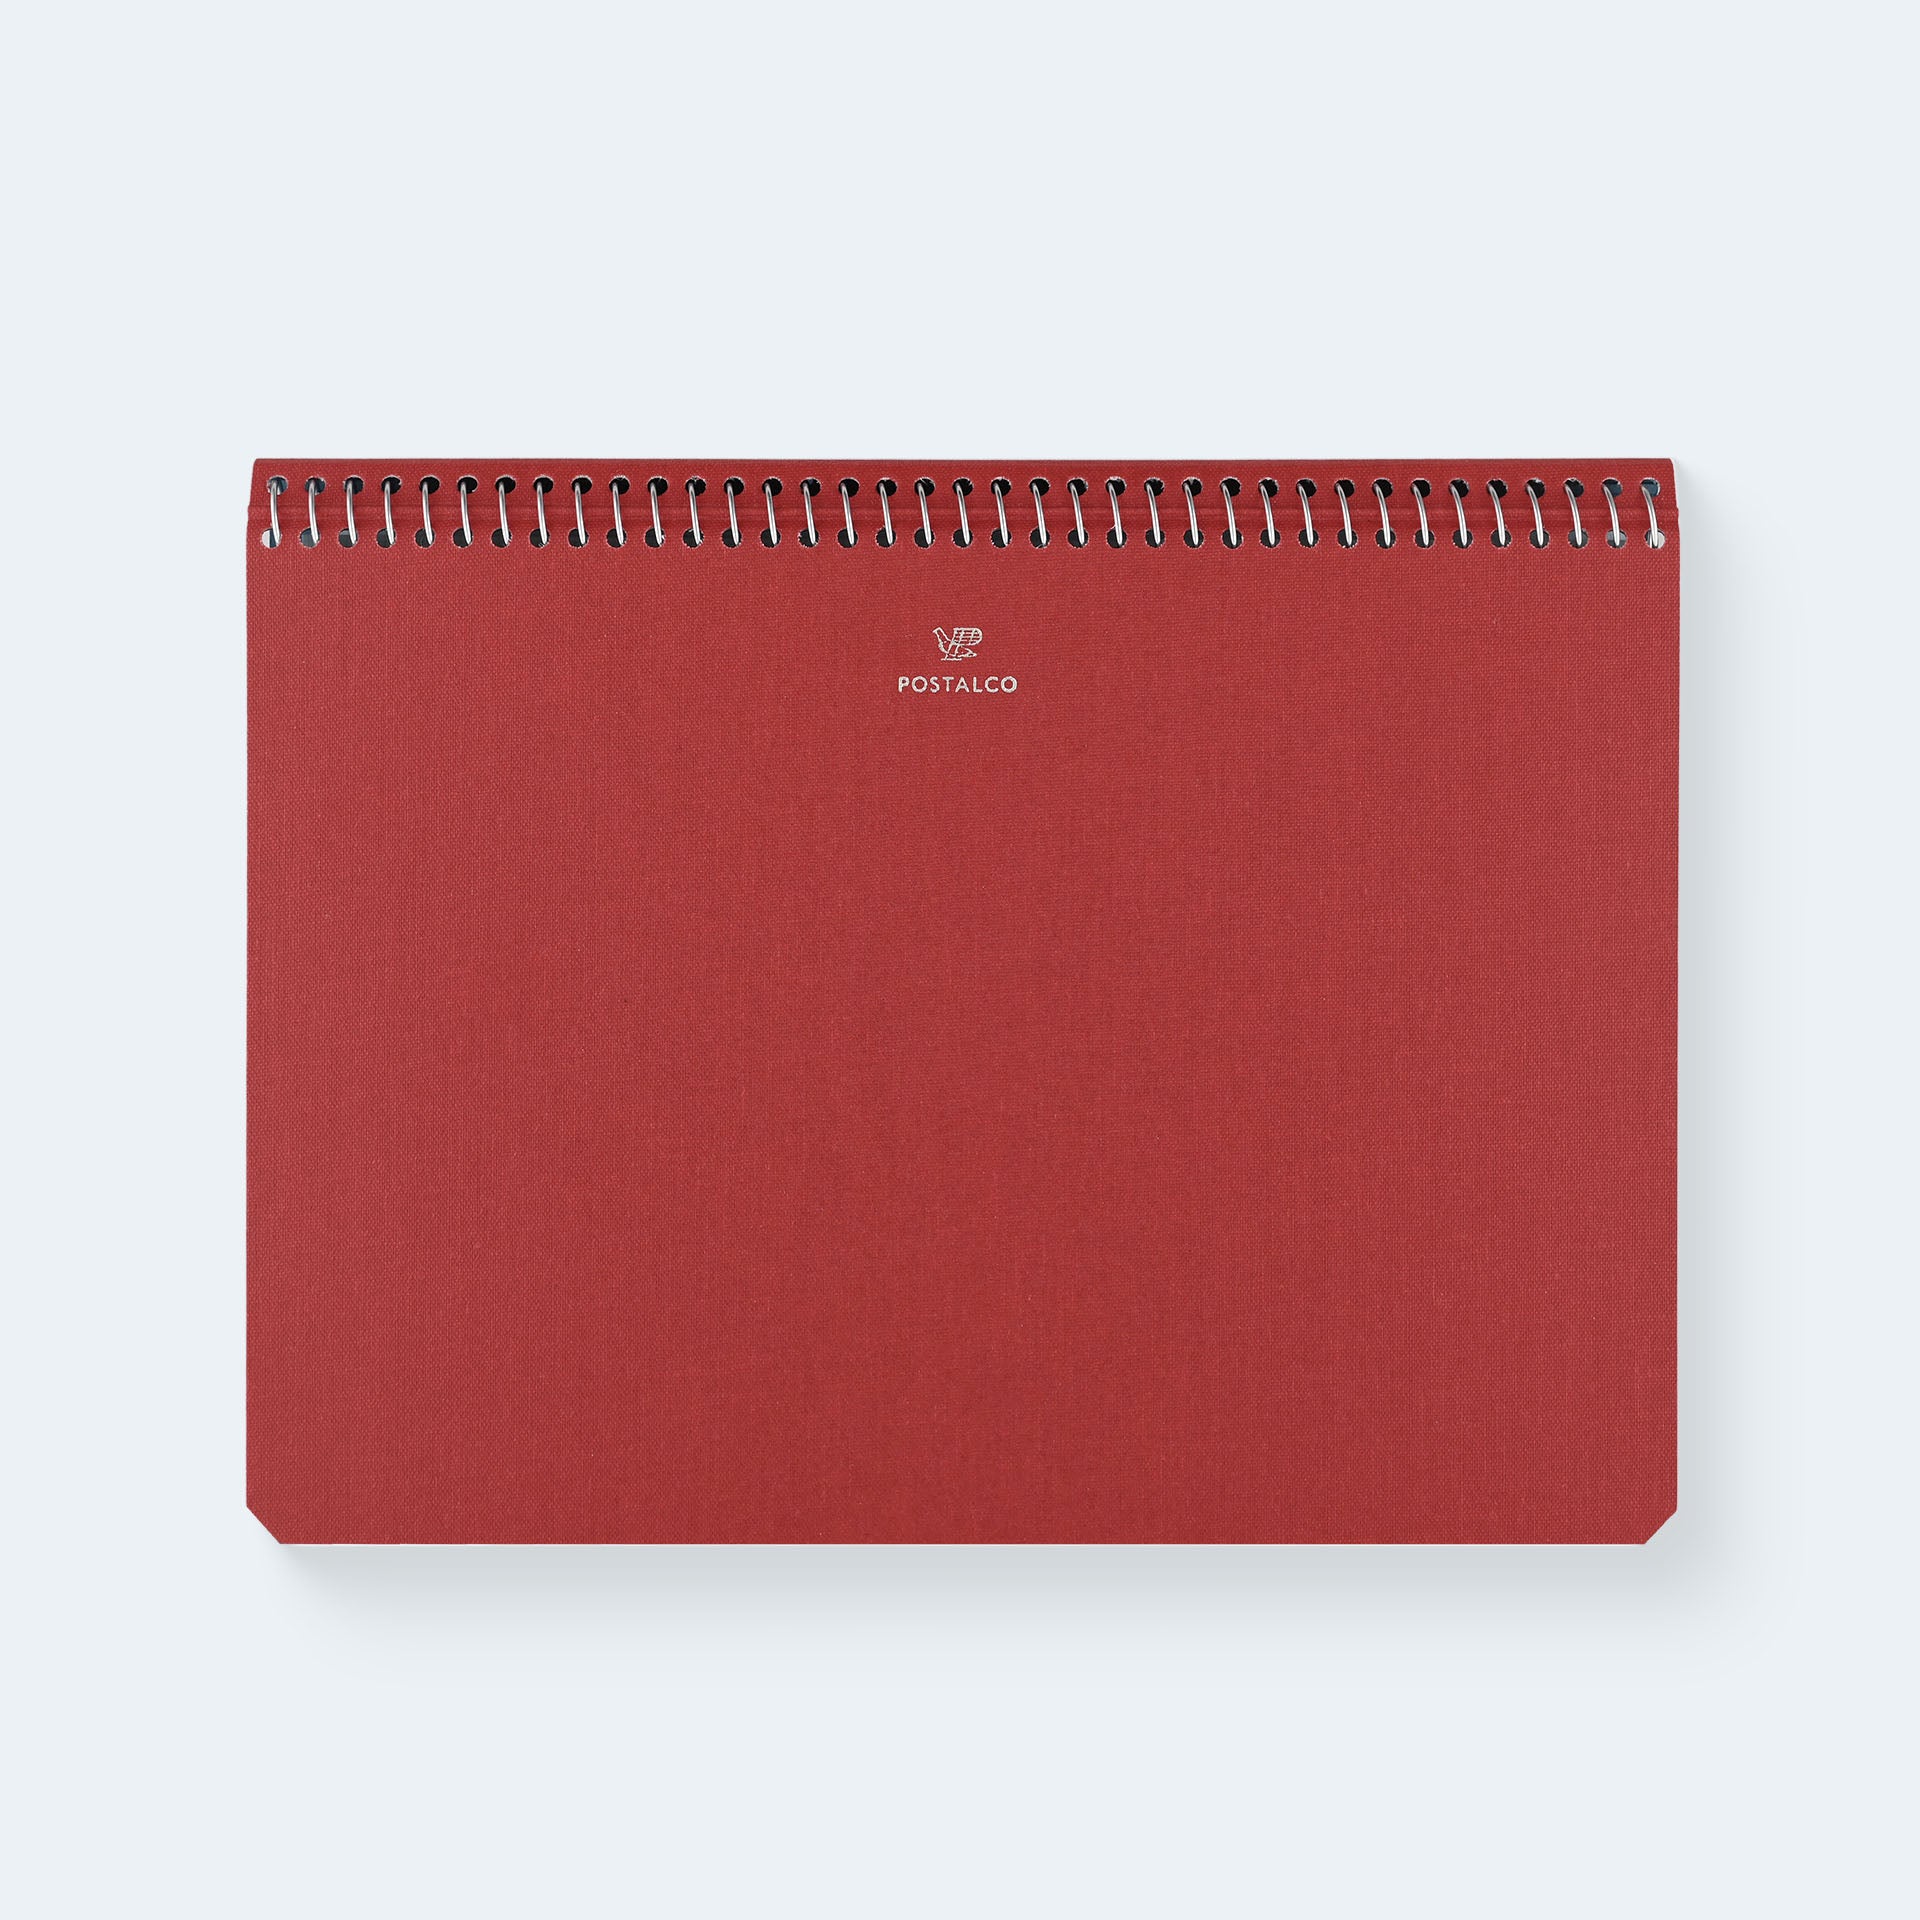 Postalco Signal Red Pingraph Notebook A5 